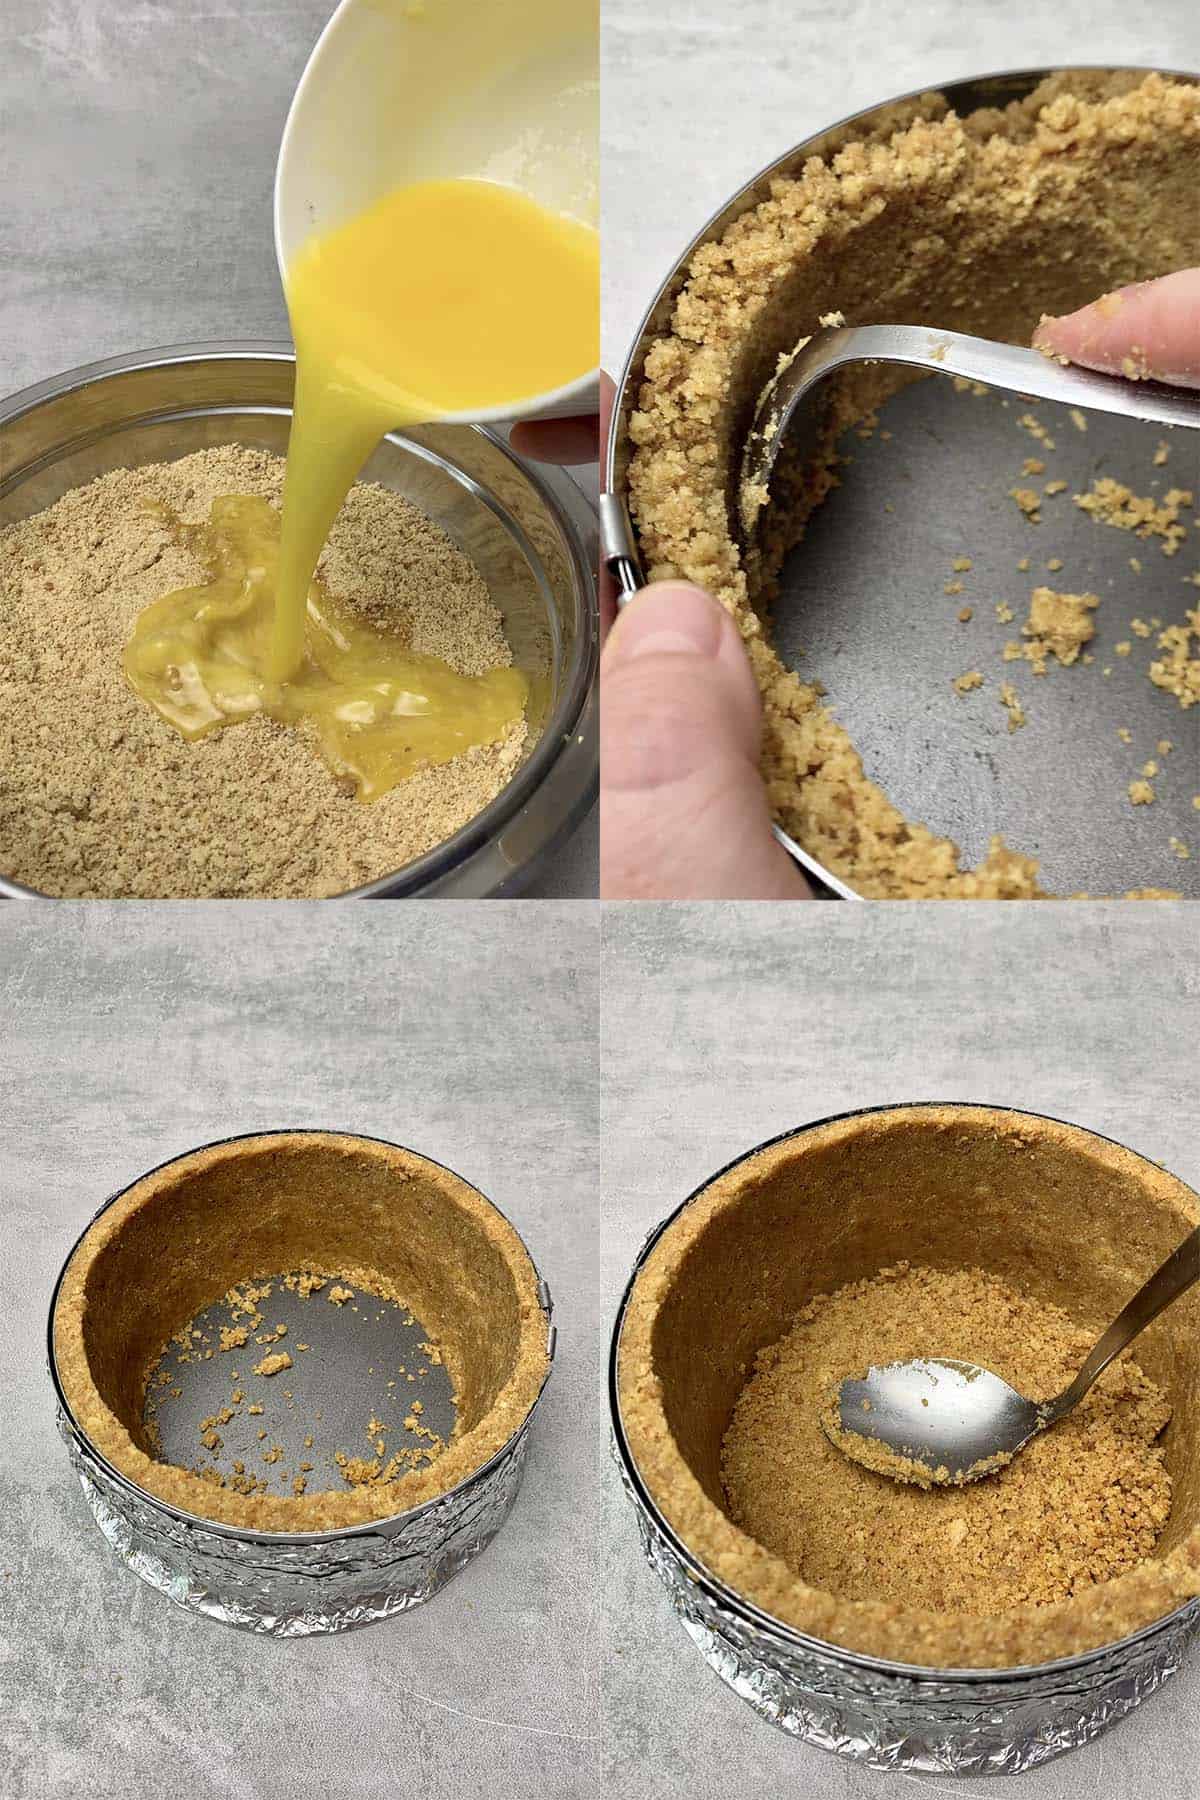 Cheese cake crust step by step process